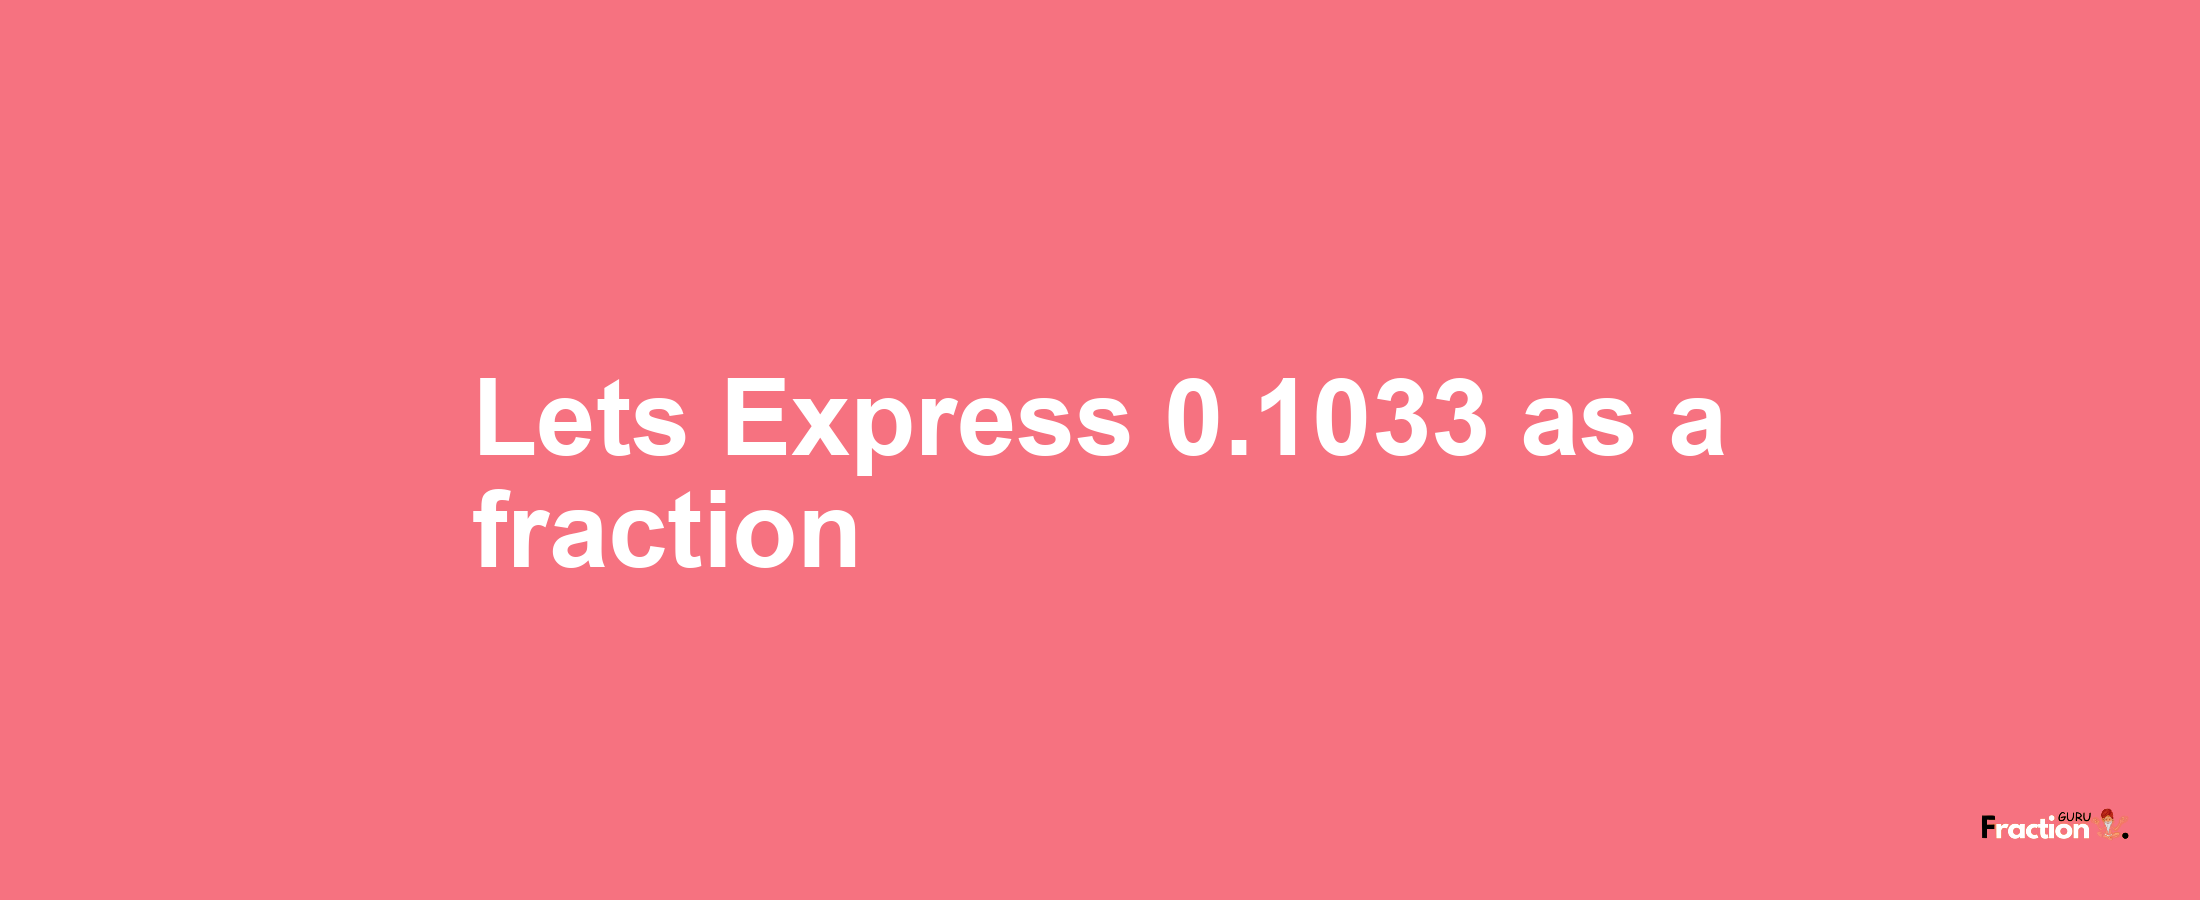 Lets Express 0.1033 as afraction